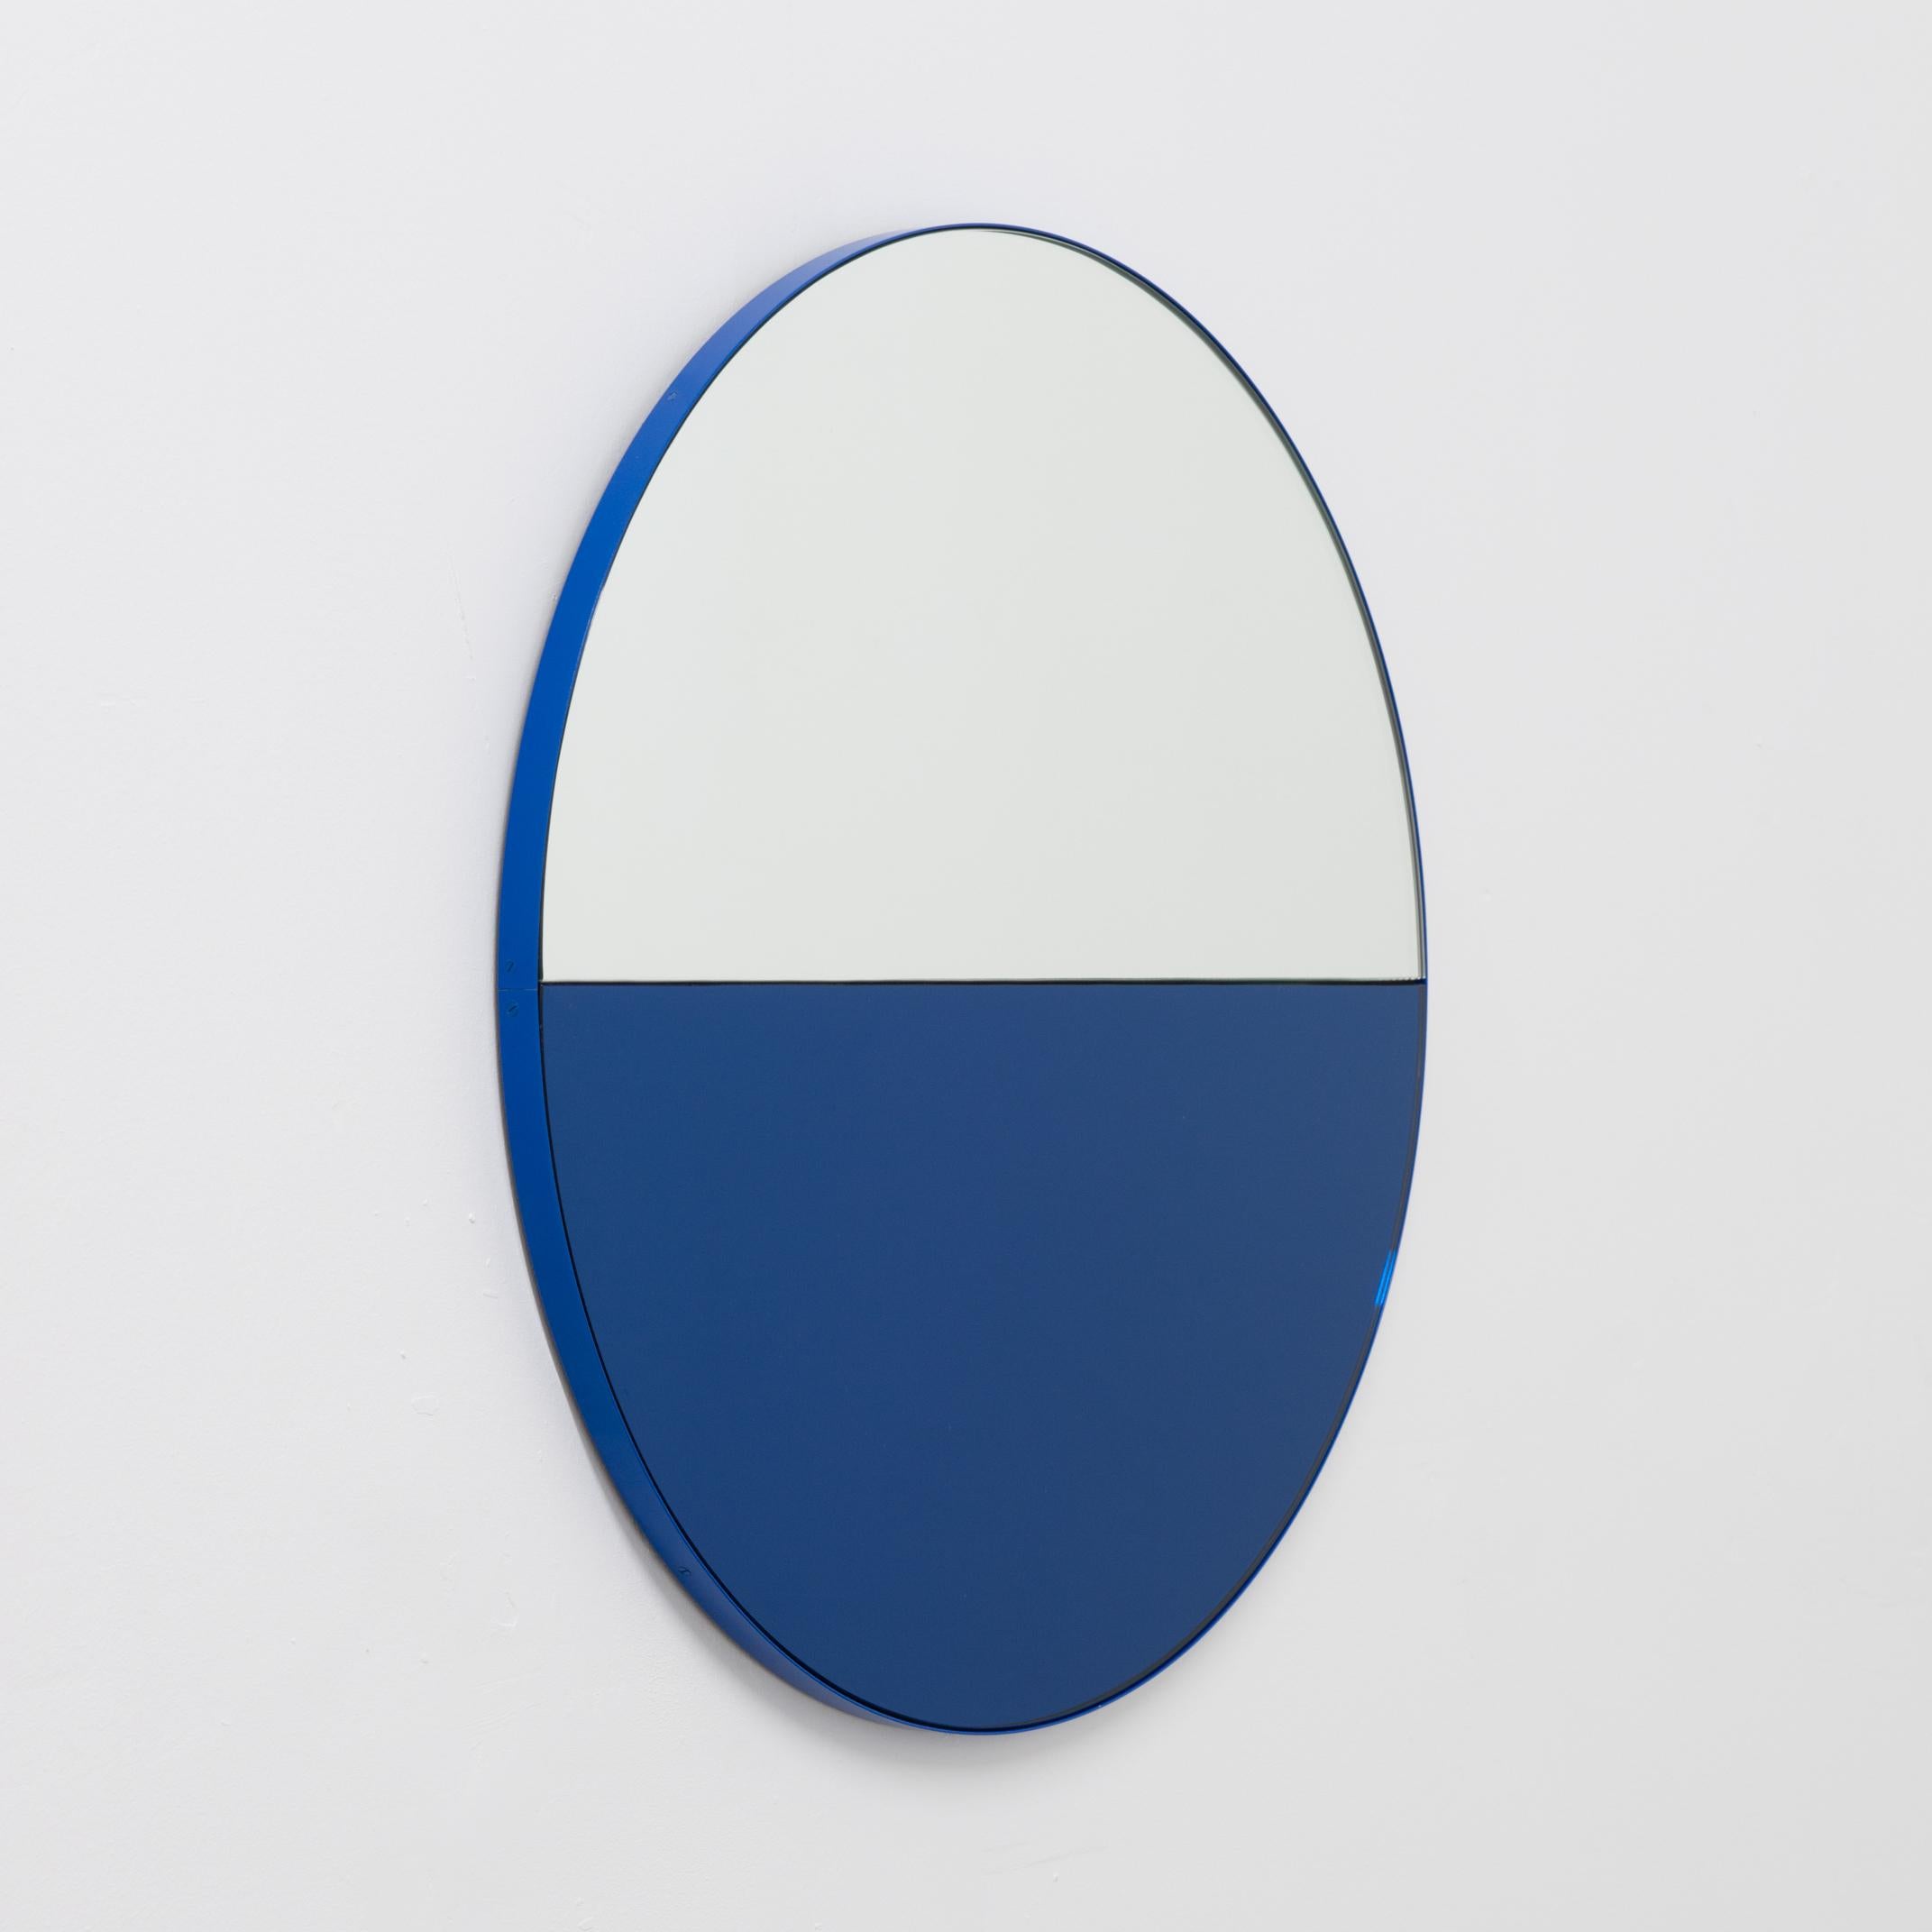 Contemporary Orbis Dualis Mixed Blue Tinted Modern Round Mirror with Blue Frame, XL For Sale